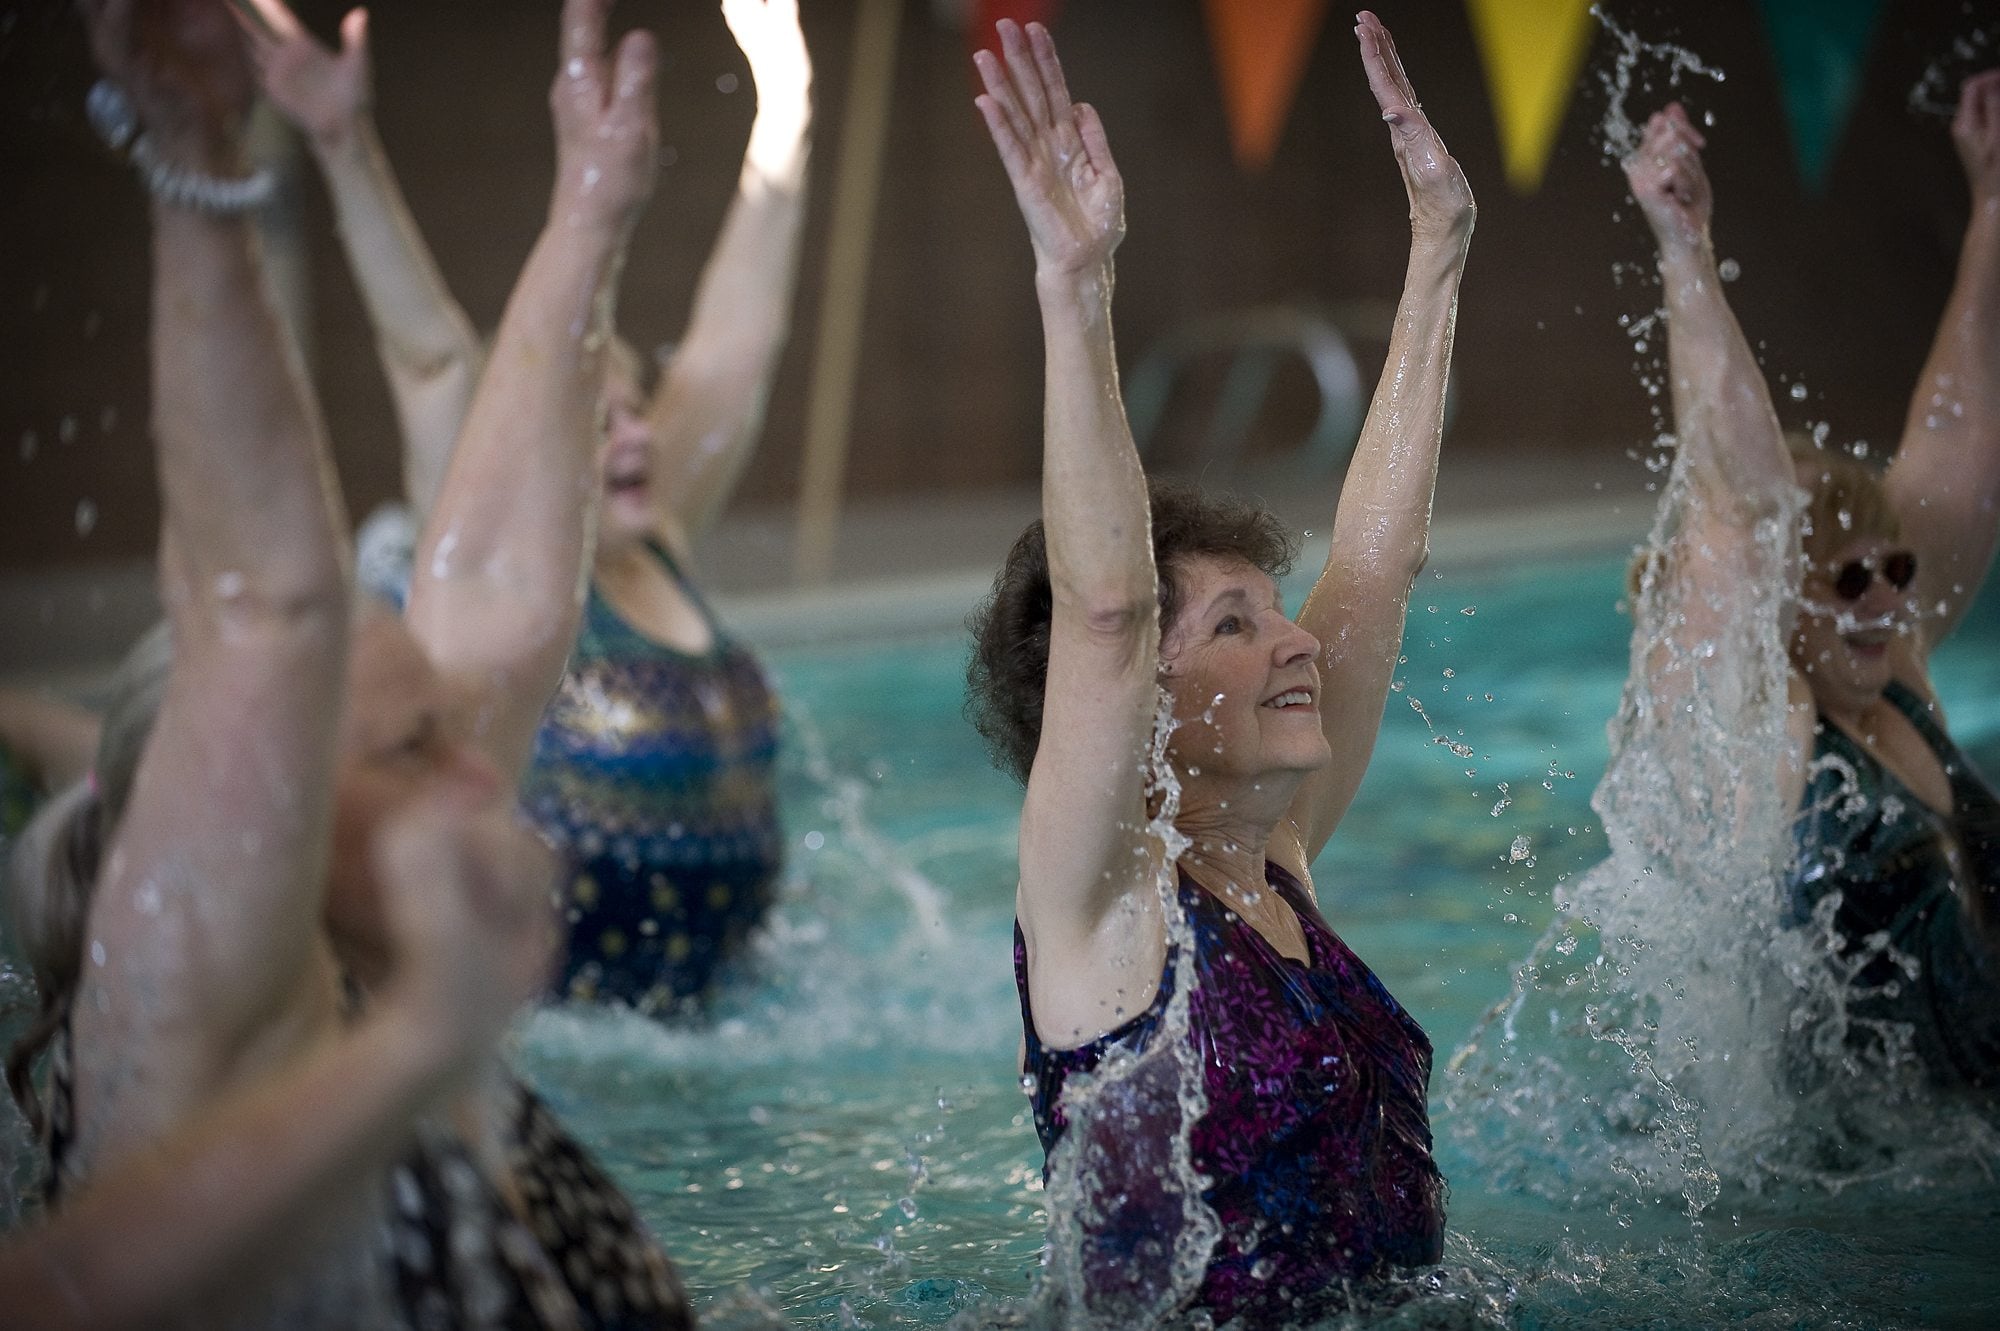 Cathy Harper, center, leaps out of the water during an aqua Zumba class at the Touchmark Health and Fitness Club in east Vancouver.